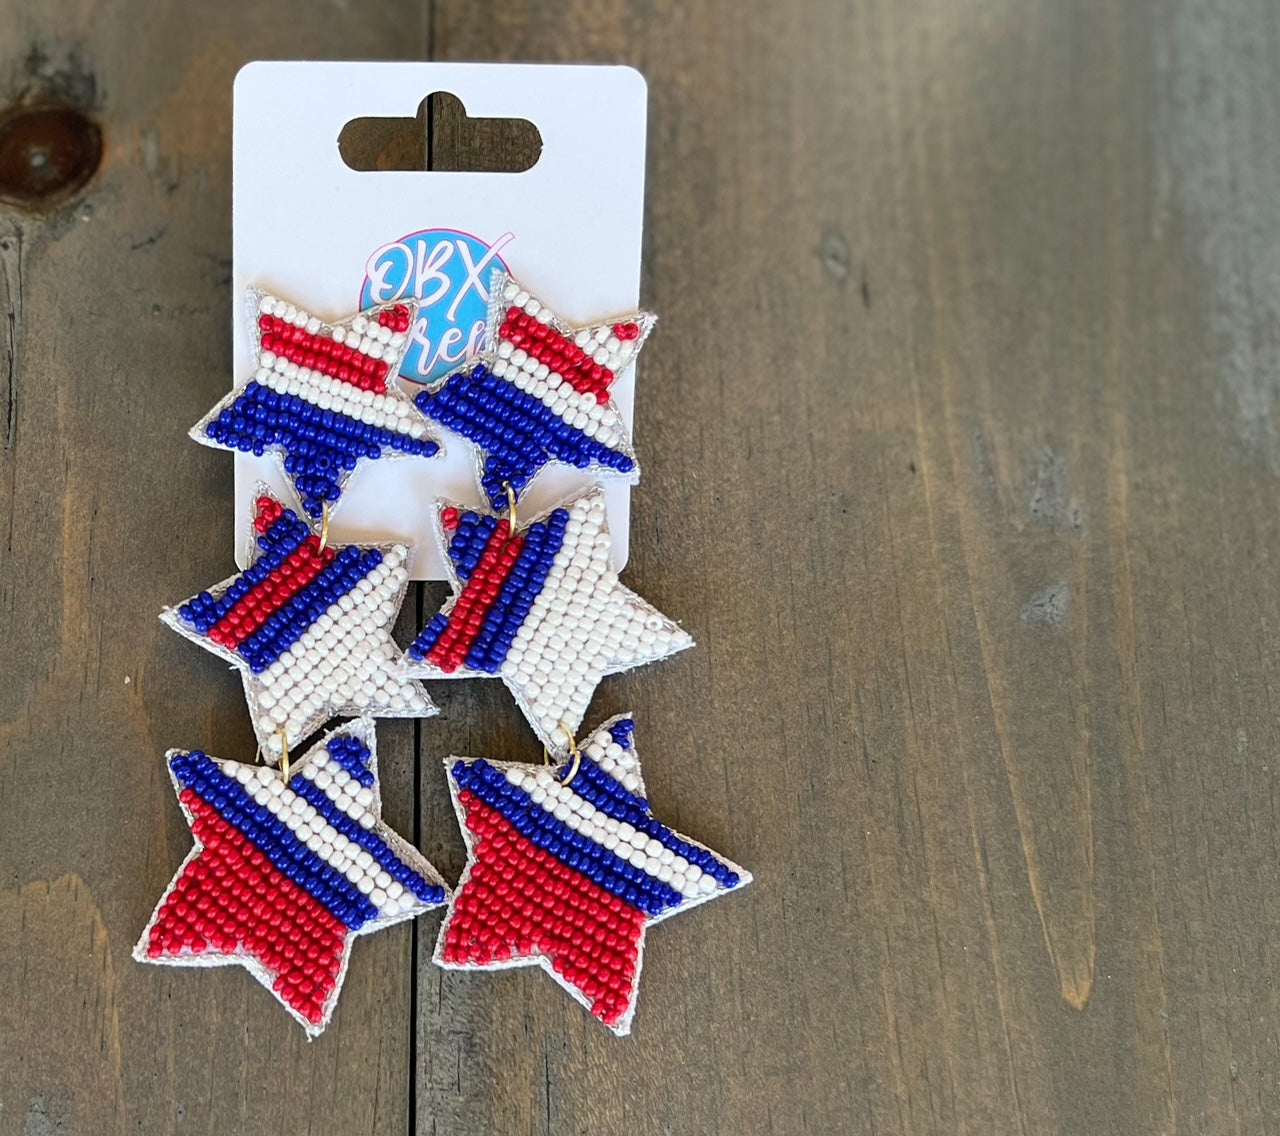 Patriotic Red White and Blue Striped Triple Stars Handmade Earrings - OBX Prep